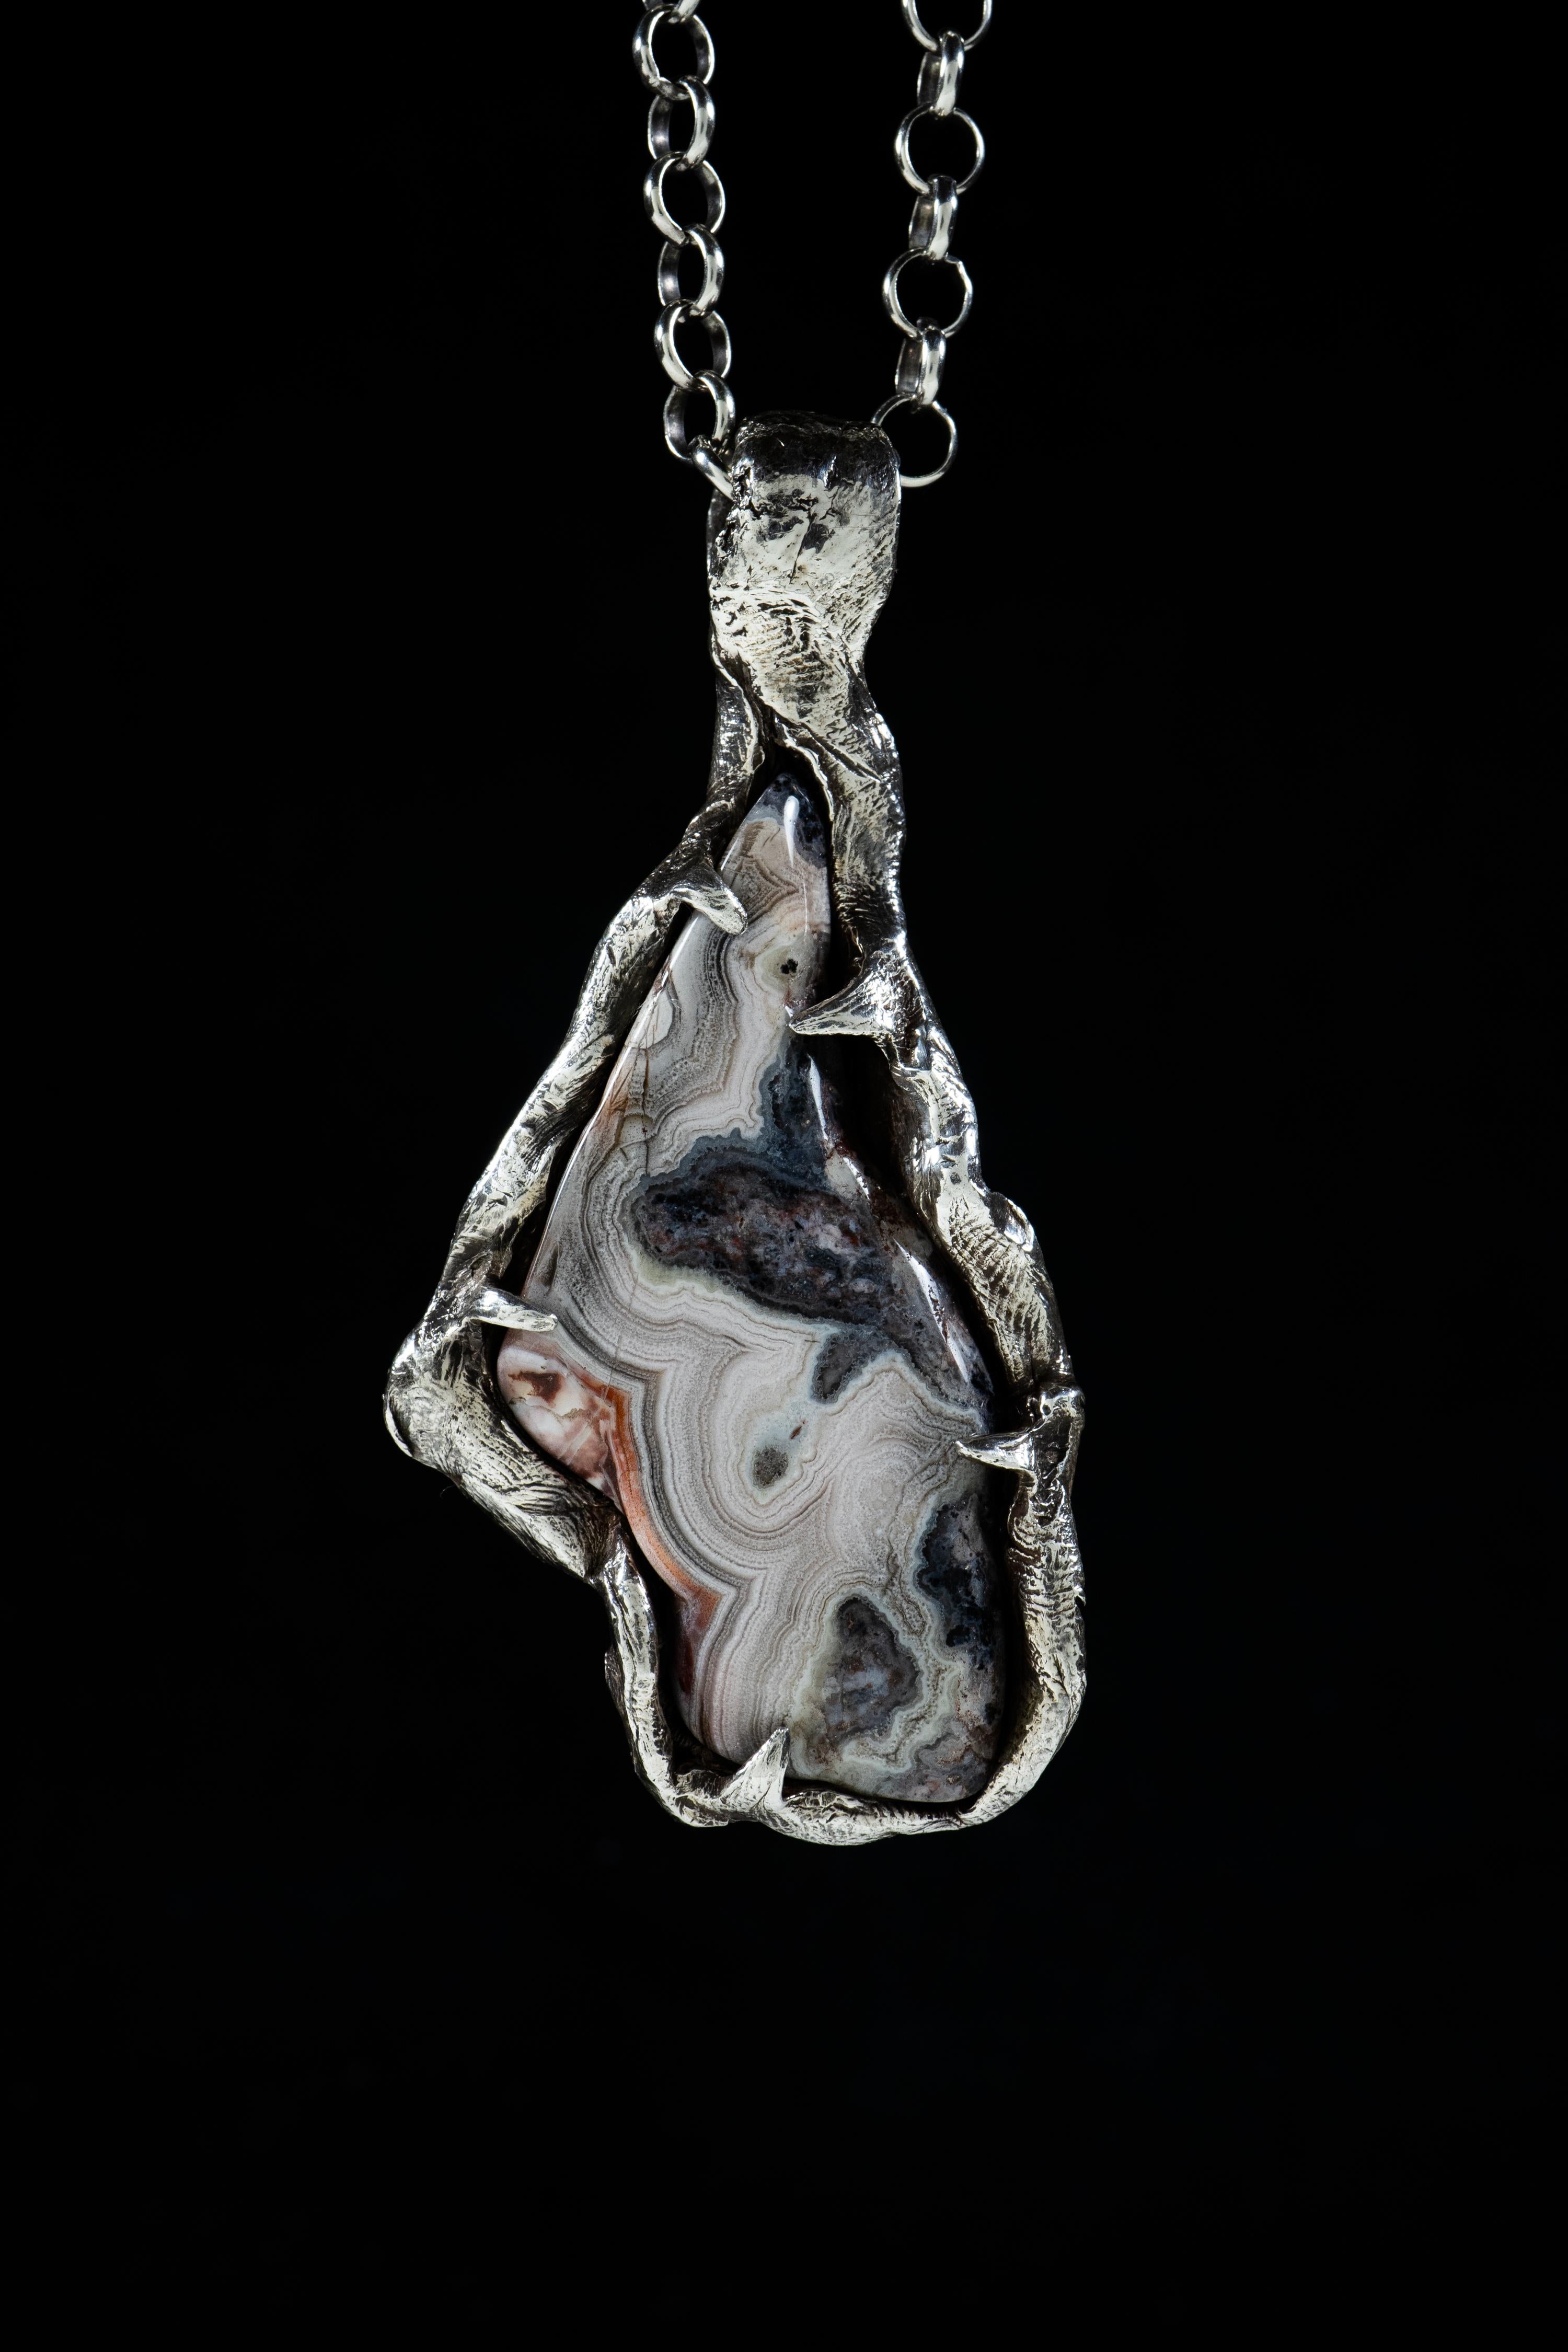 Layers of Space is a one-of-a-kind pendant by Ken Fury that is hand-carved, cast in sterling silver, and features a natural Agate stone.

Size: 76mm x 35mm

Hand-signed
